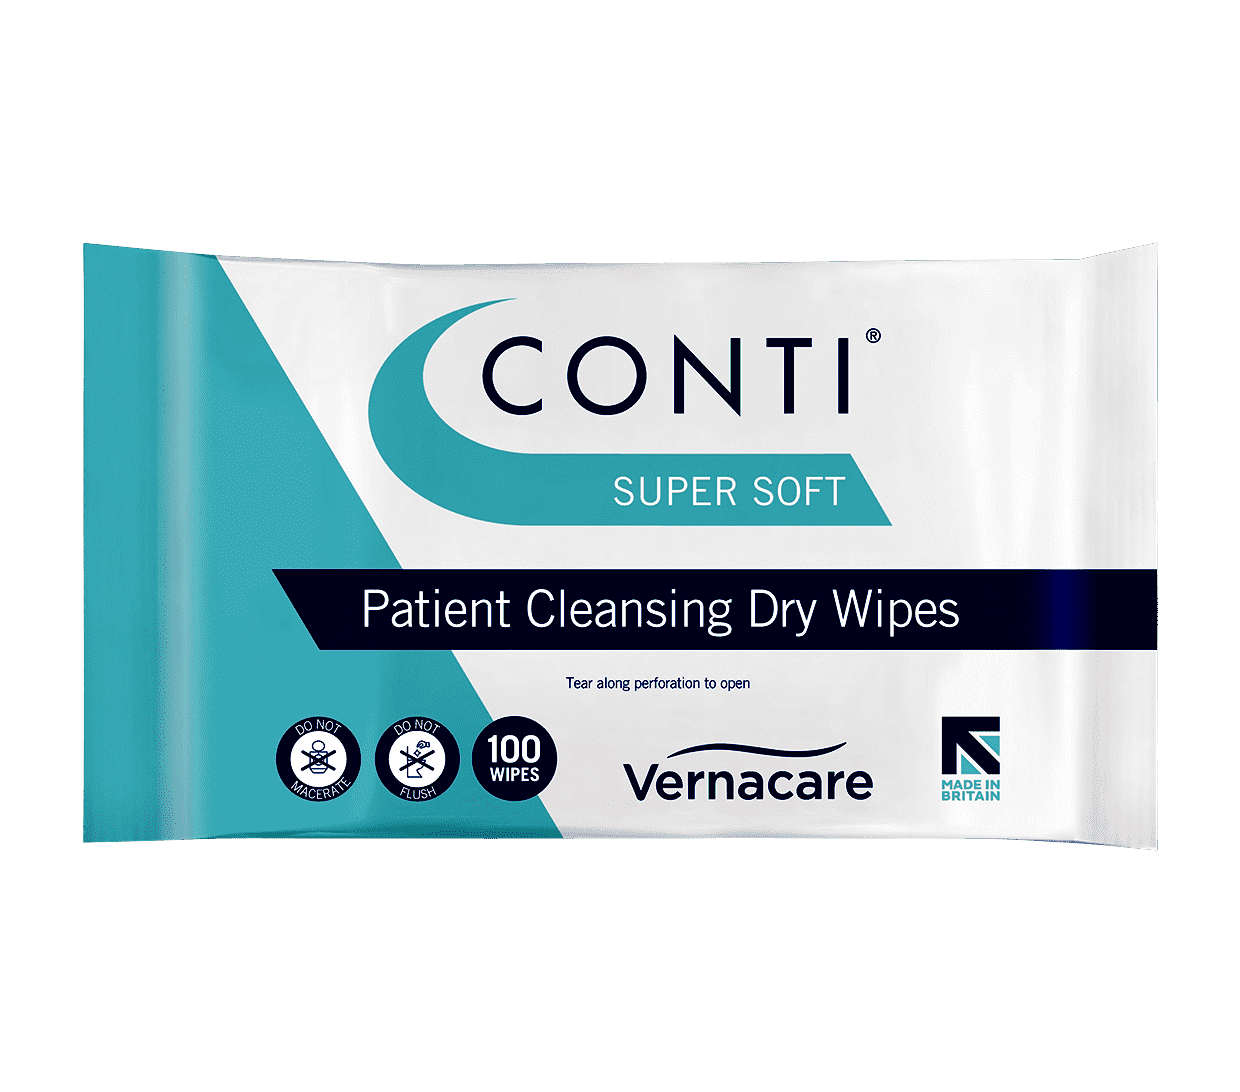 Conti Supersoft Dry Wipes